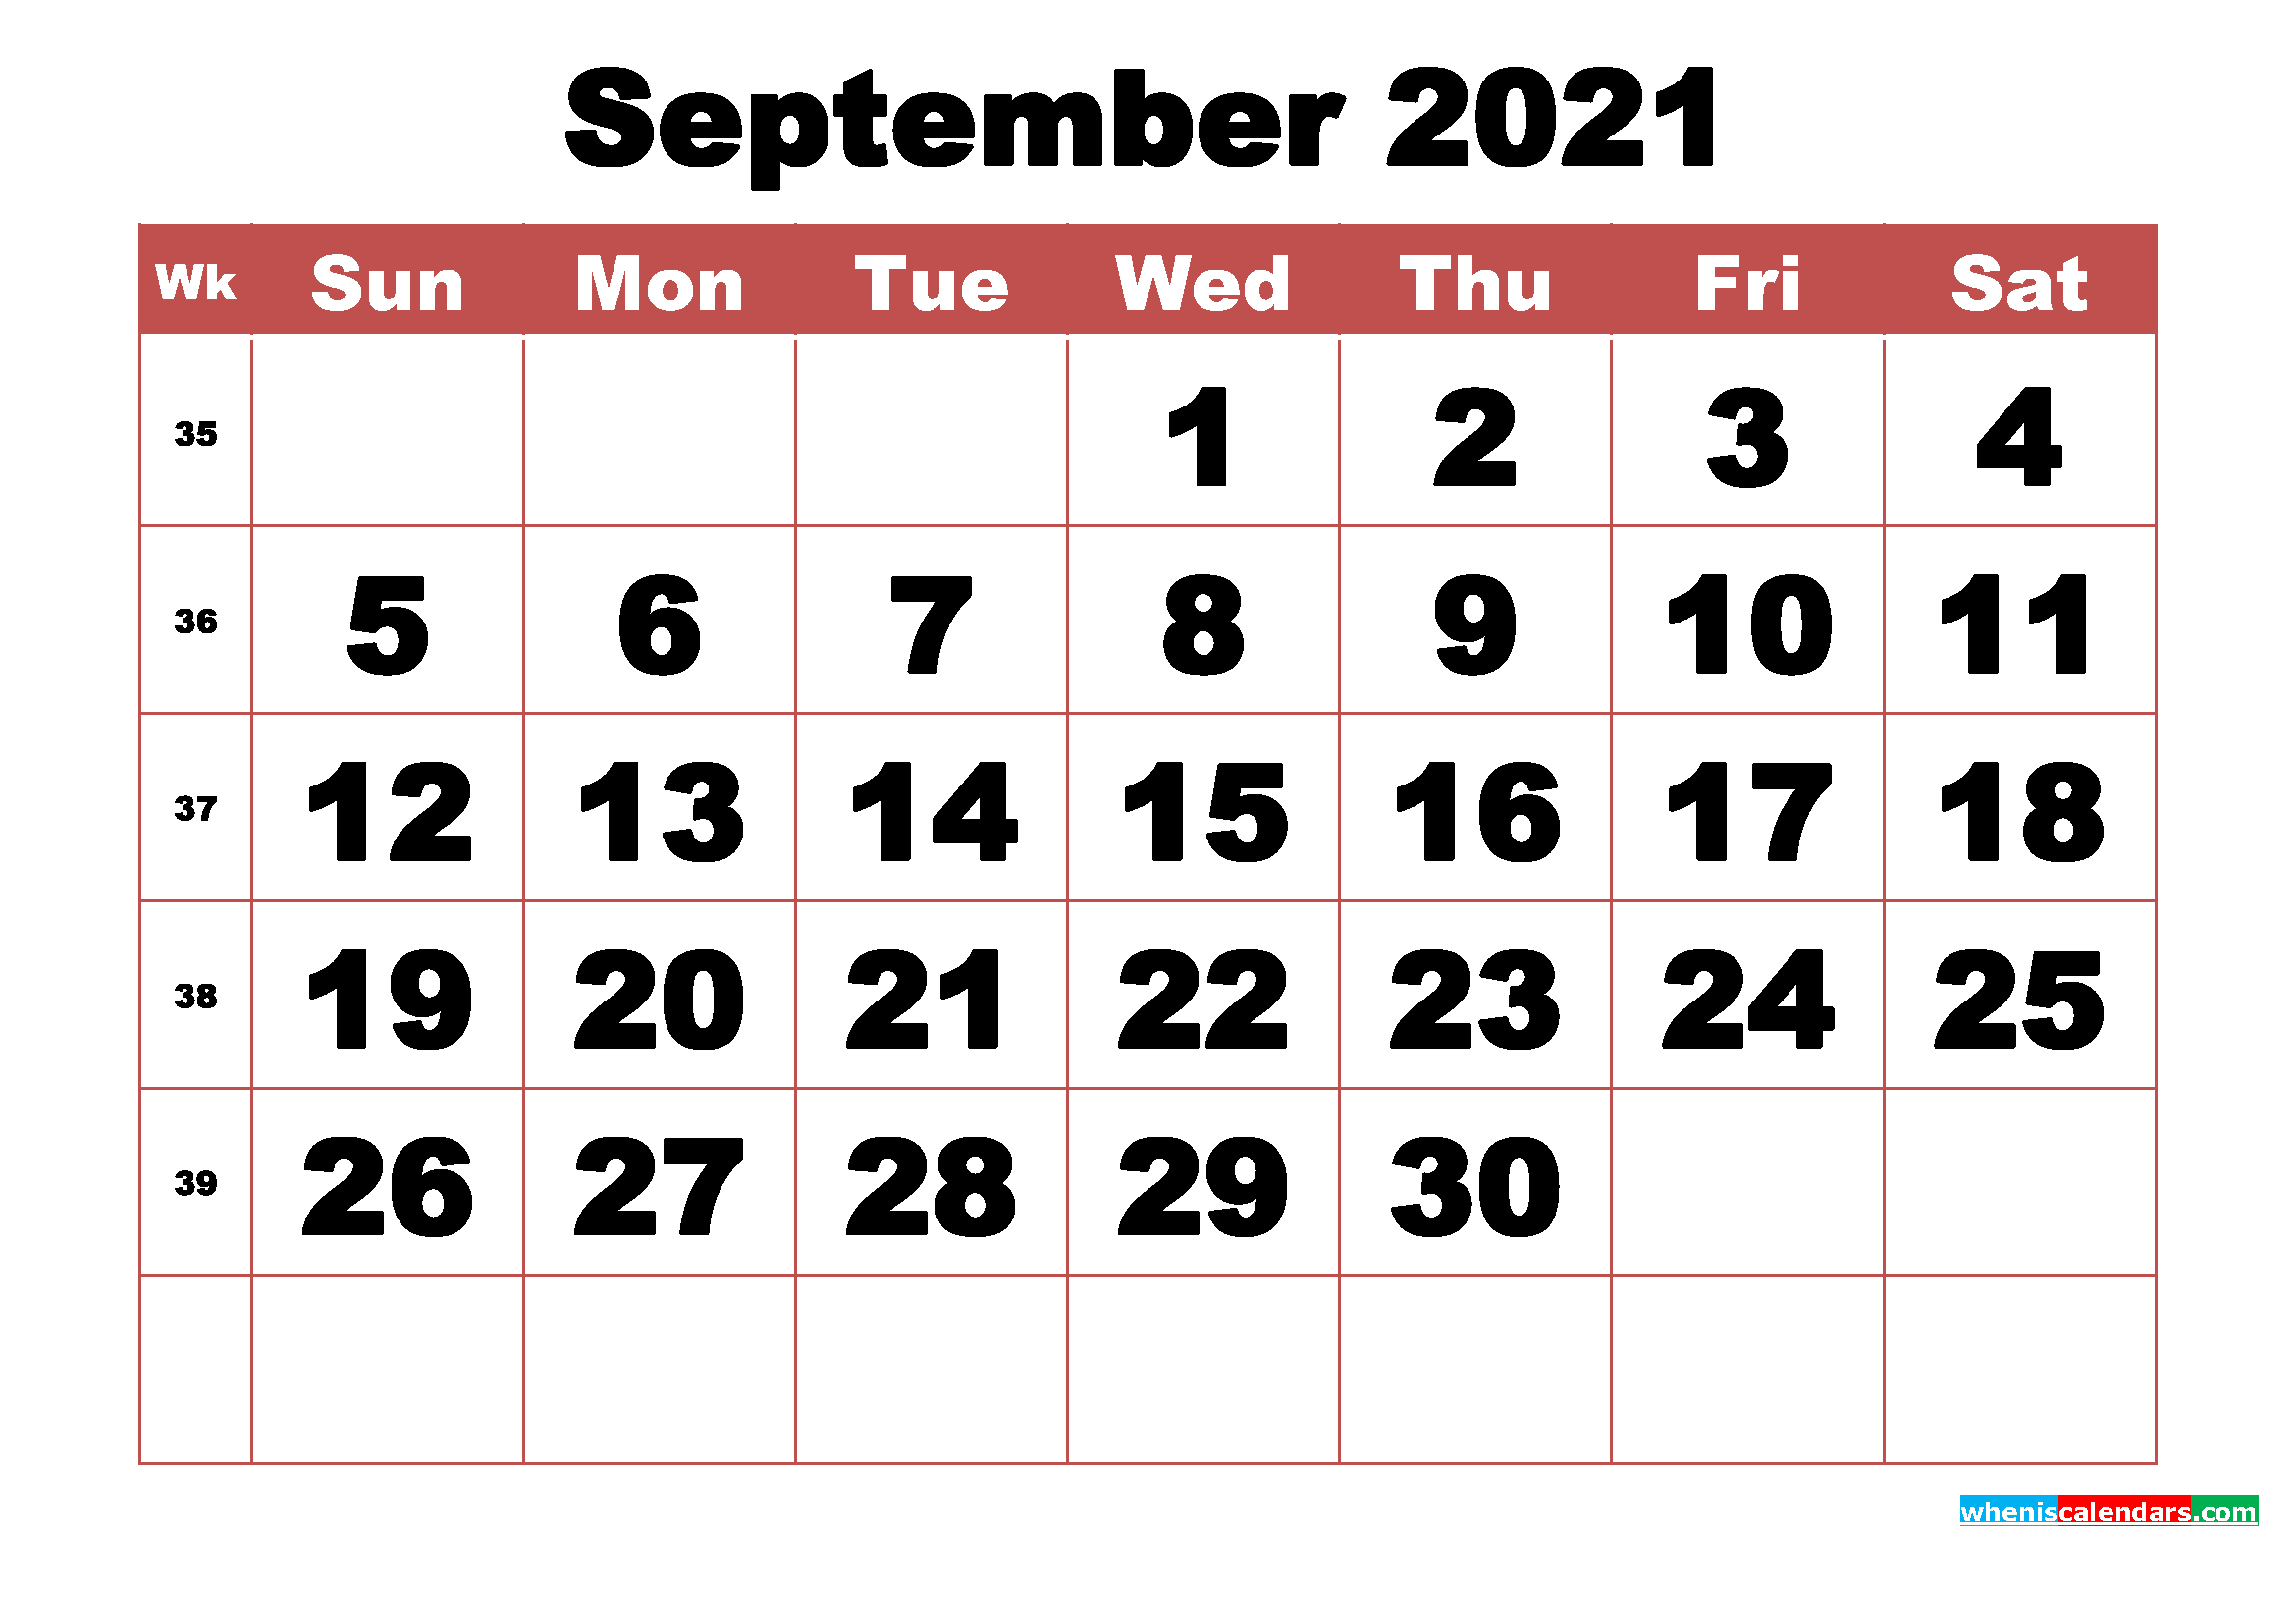 Free Printable September 2021 Calendar With Week Numbers-List Of Festivals 2021 To Print Out